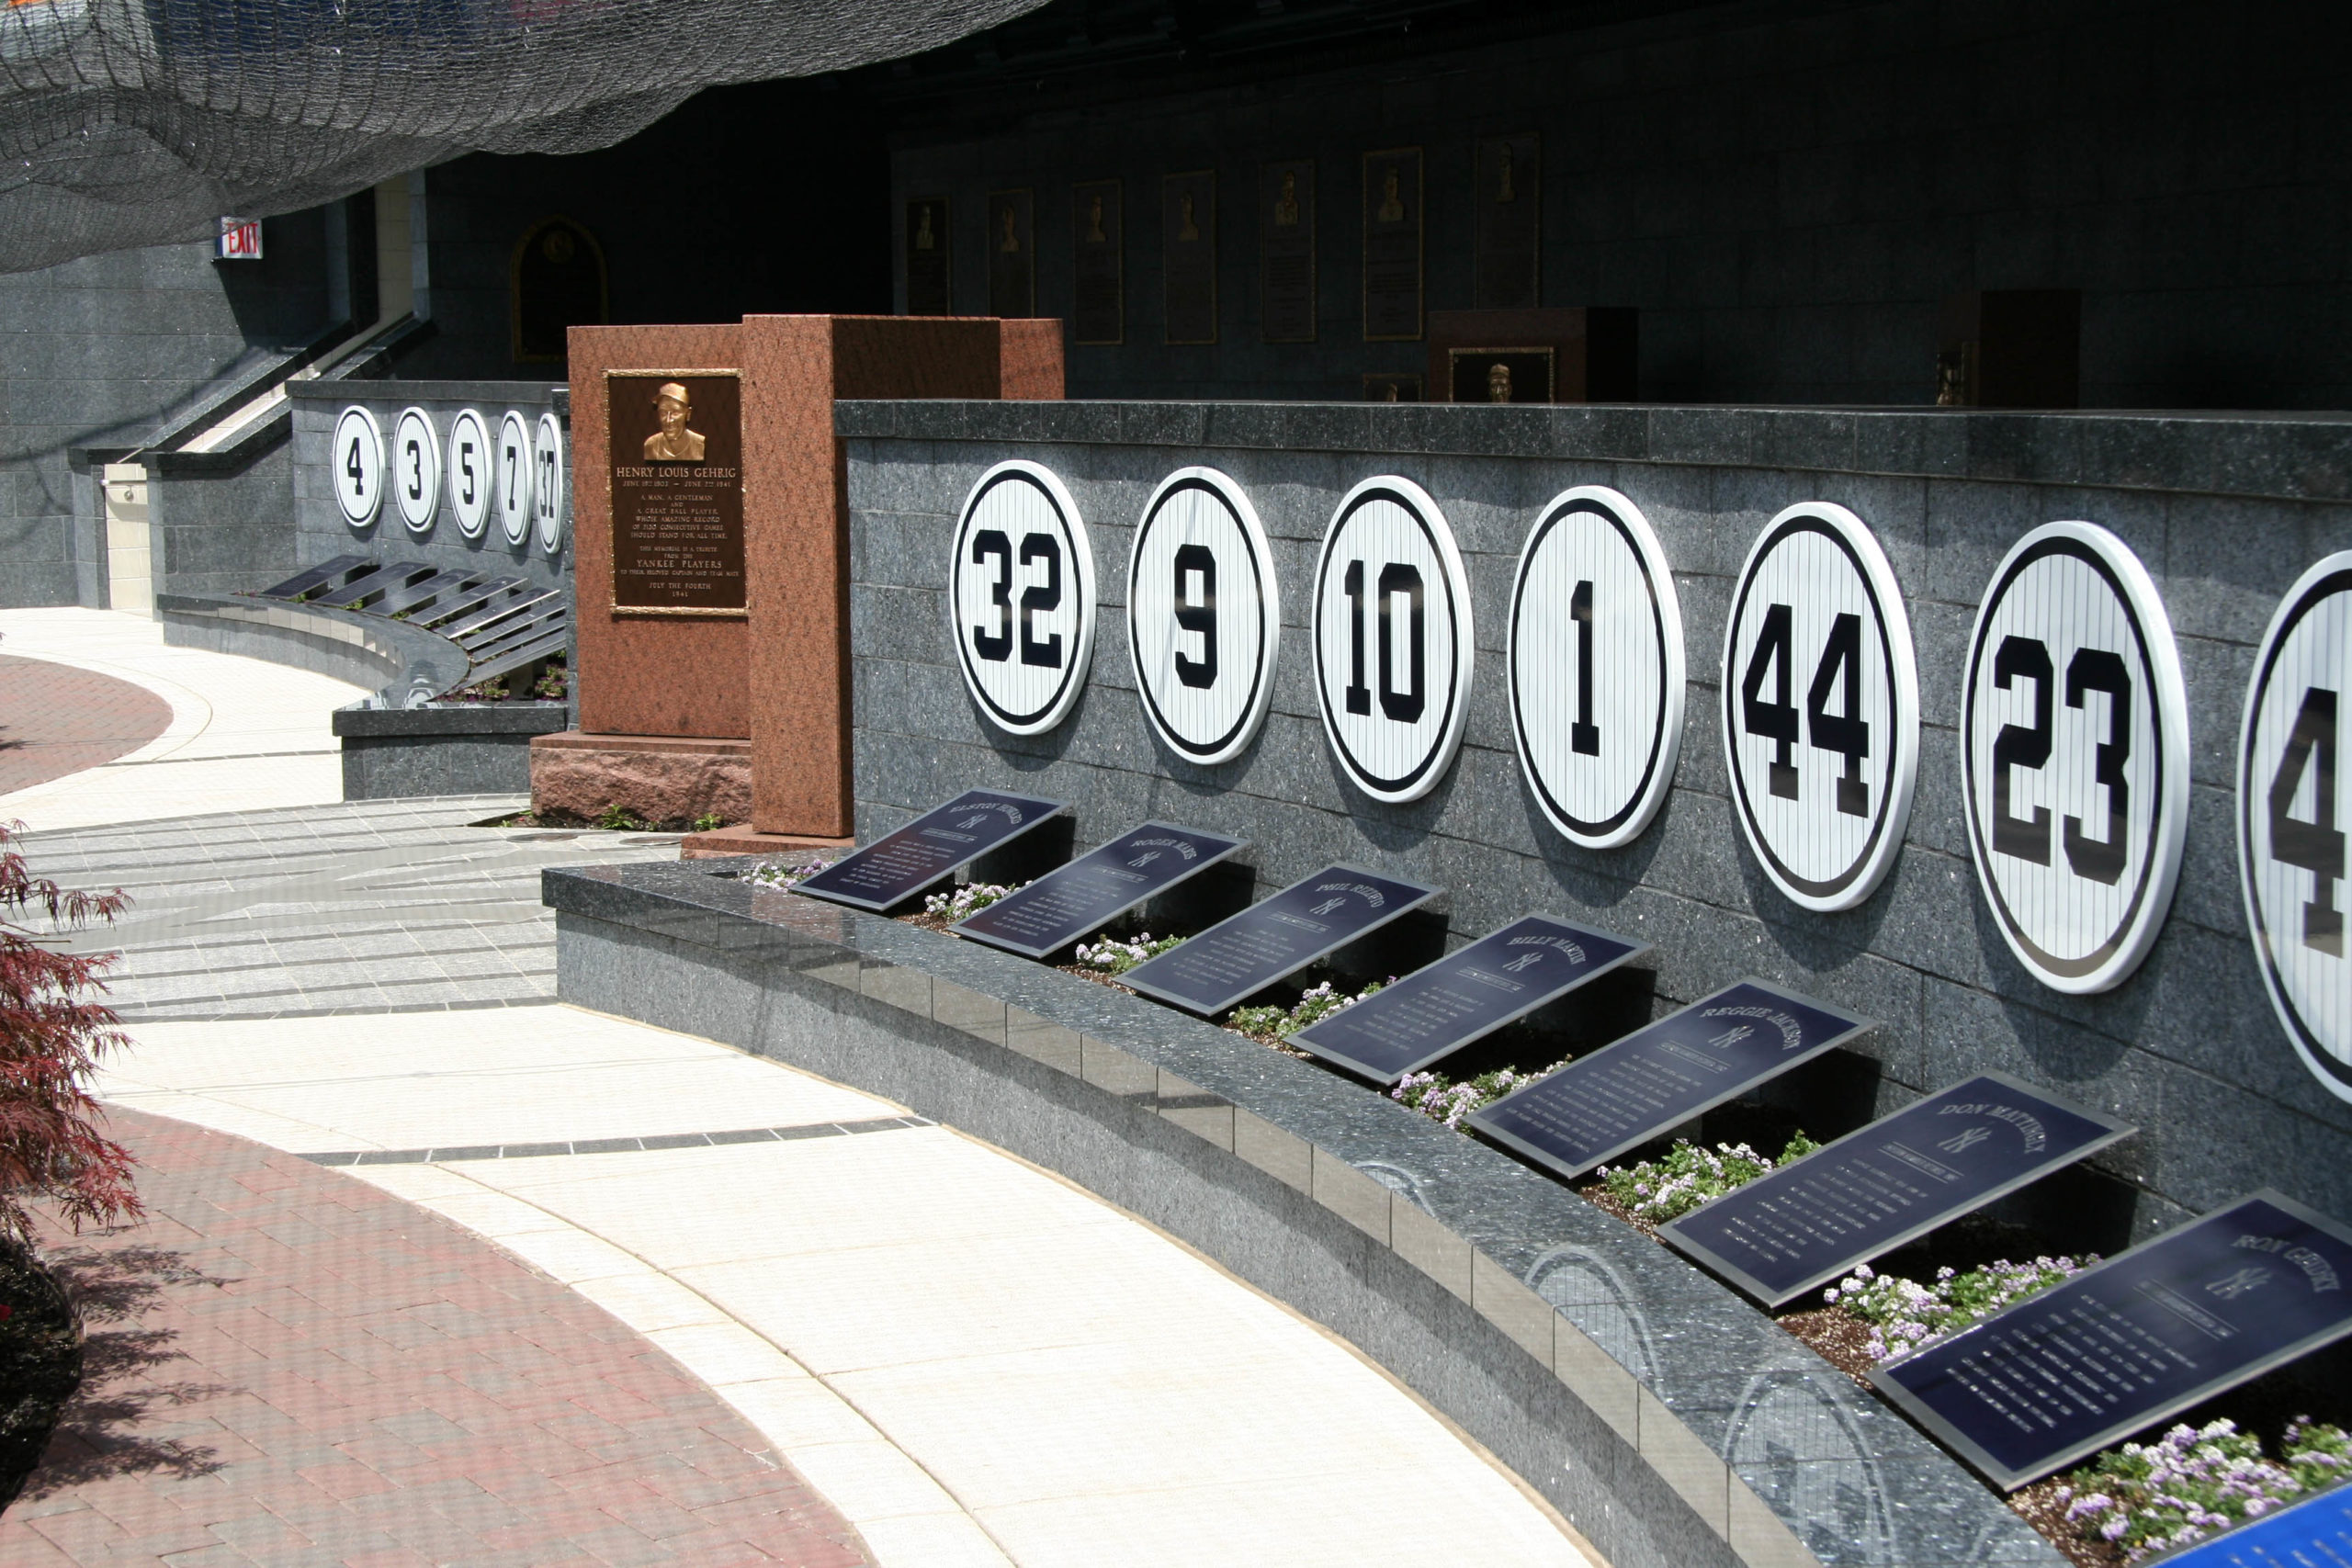 Yankees retired numbers: A look at all of the jersey numbers players cannot  wear in the Bronx 